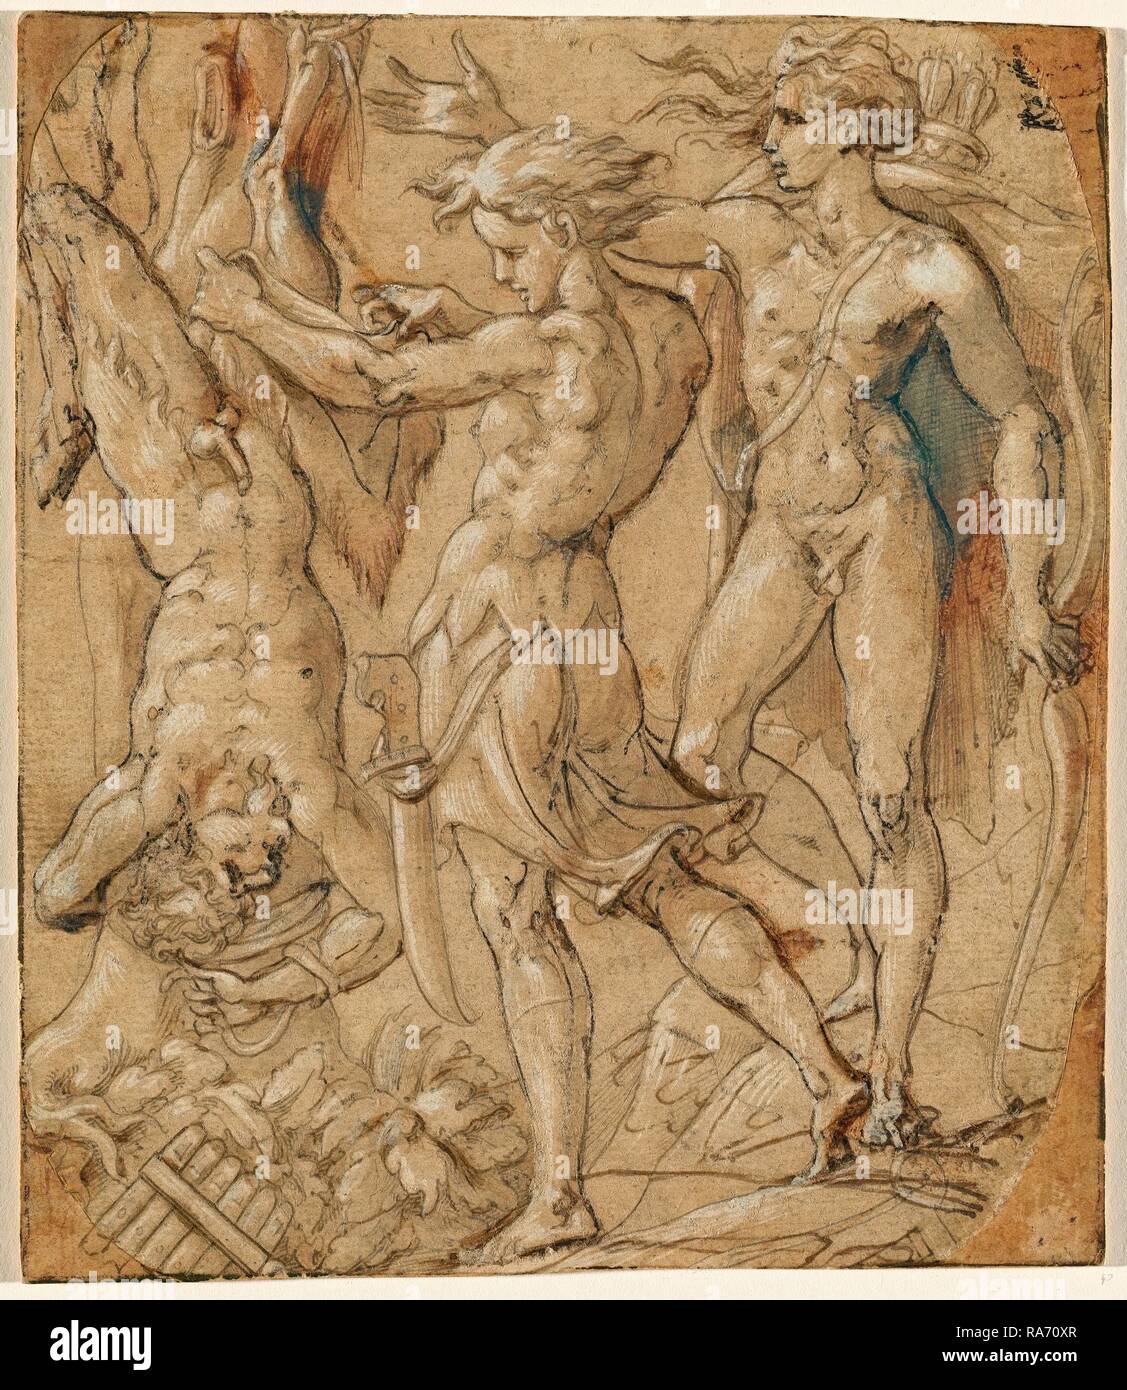 Bernardino Campi, Italian (1522-1595), The Flaying of Marsyas, pen and brown and black ink with brown wash reimagined Stock Photo